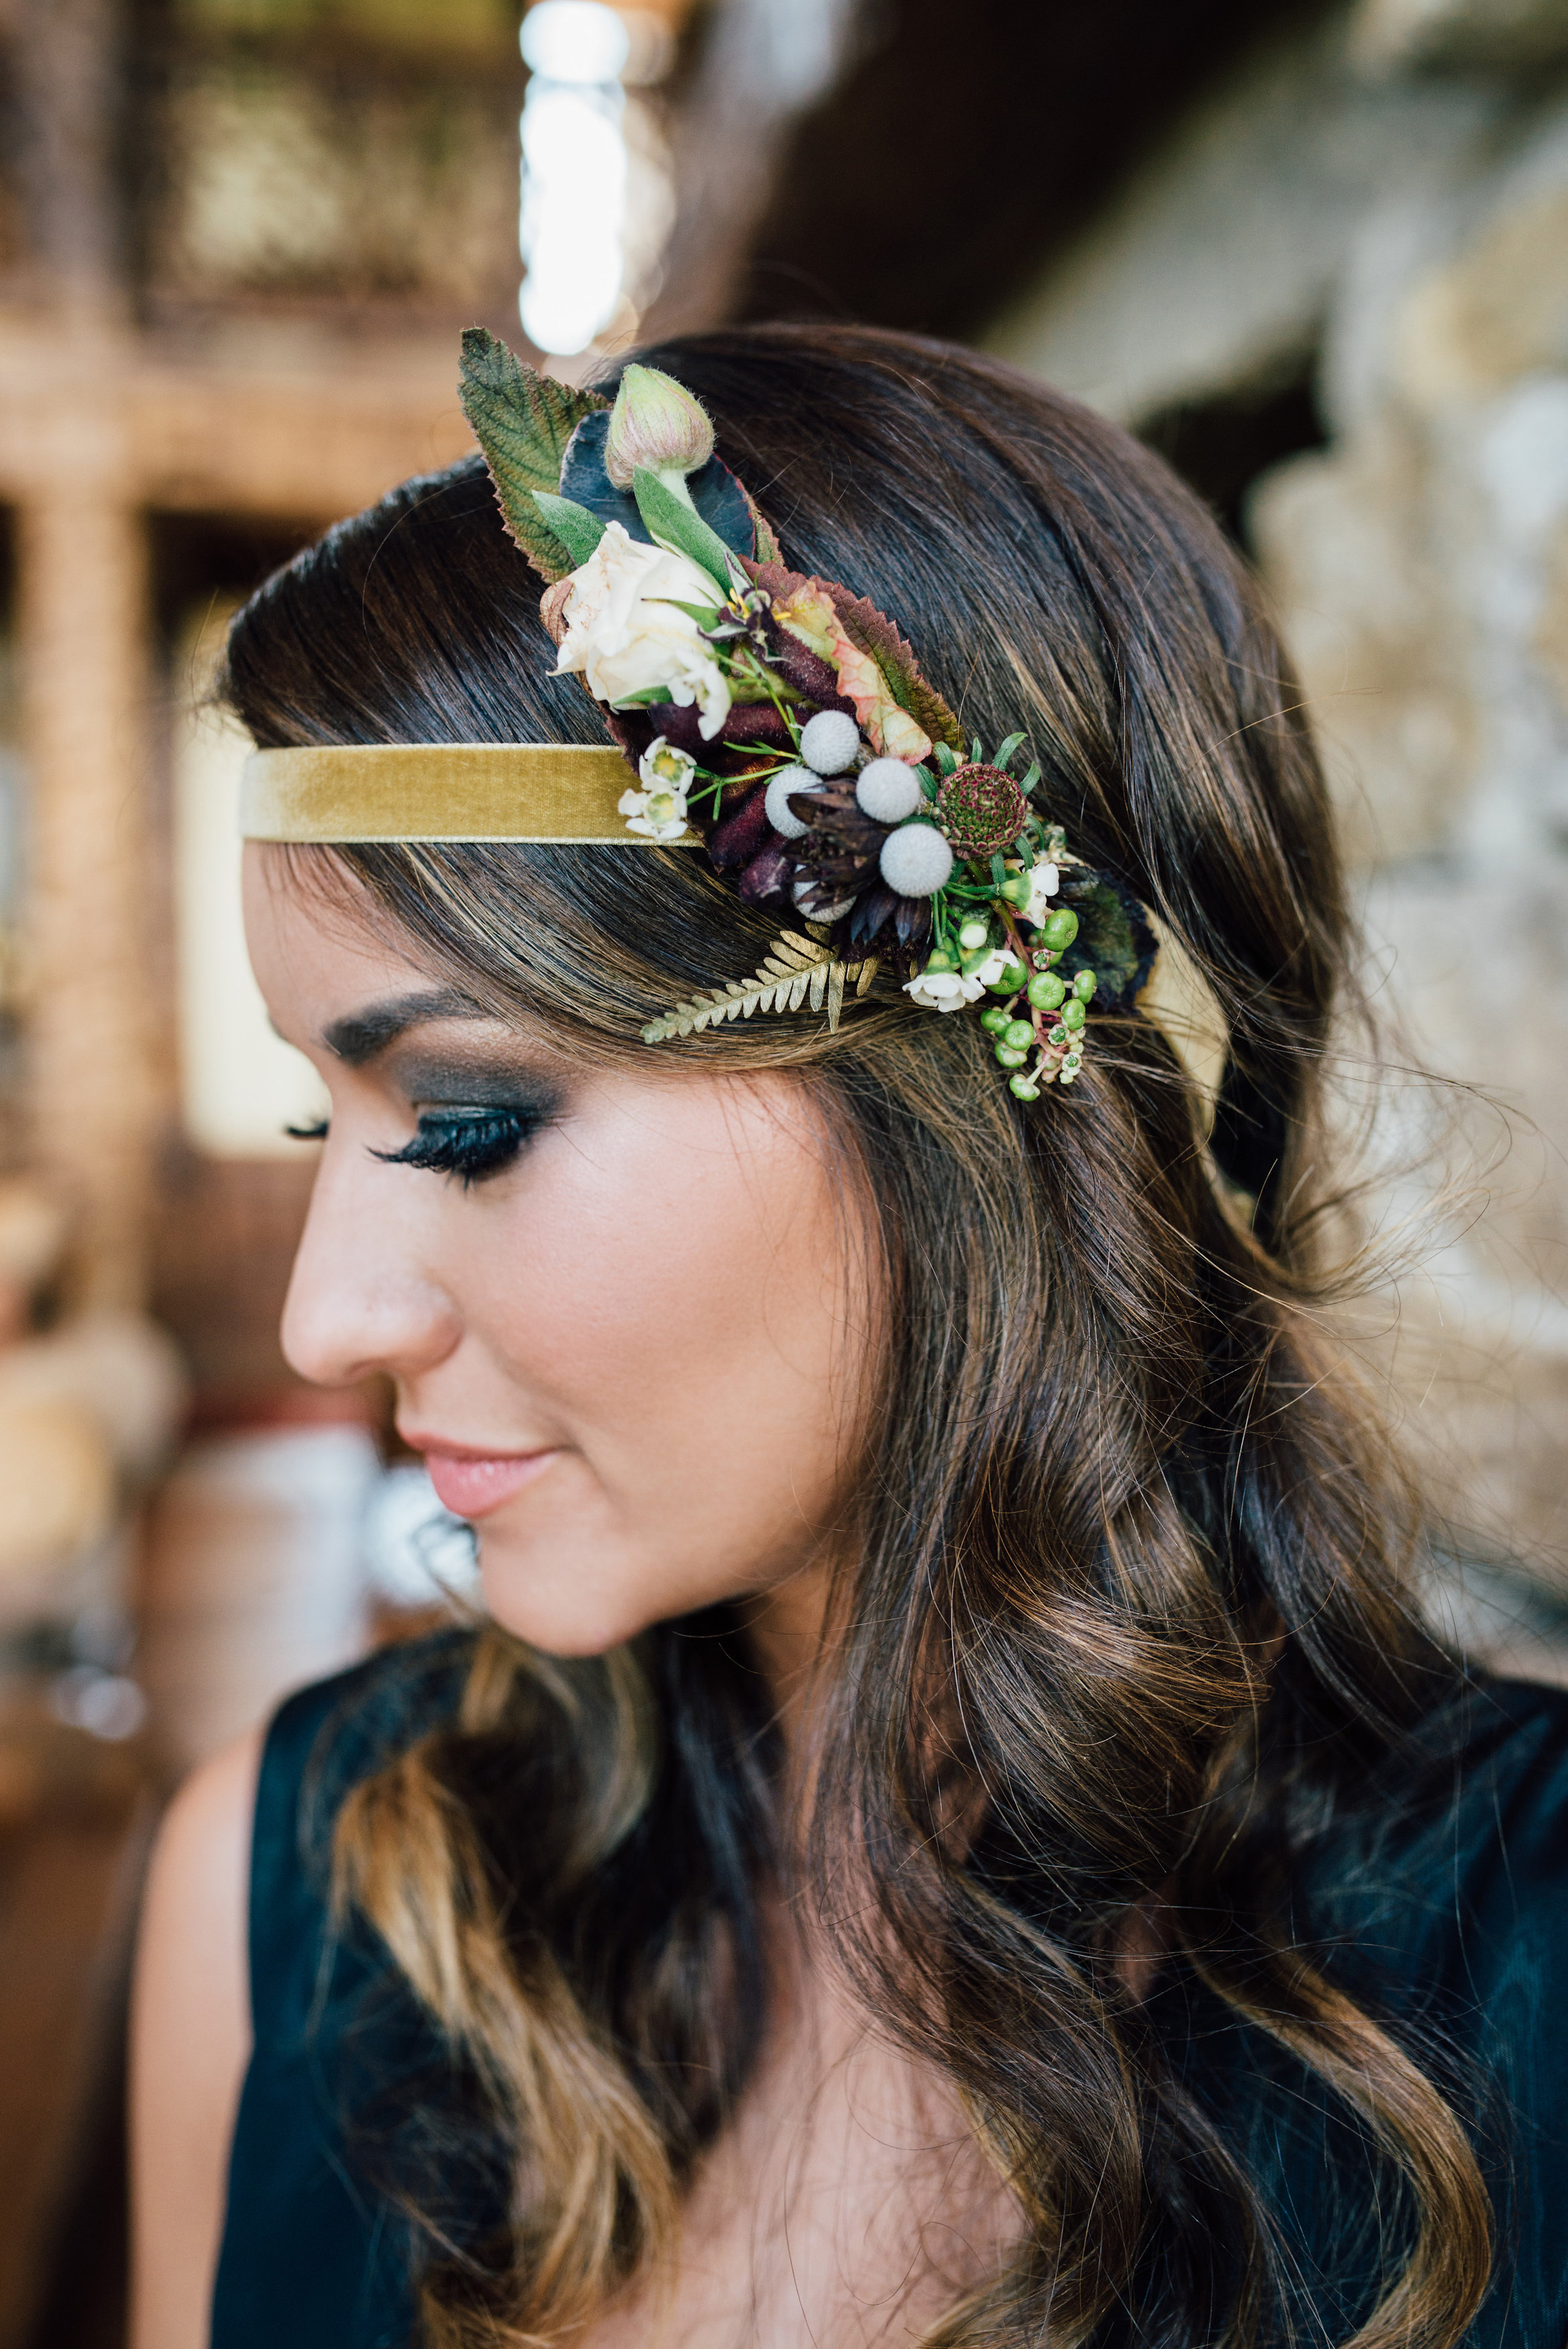  Game of Thrones Editorial Shoot by Whiskey &amp; White Events. At the Old Edwards Inn in Highlands, NC.&nbsp;  Photo by Cameron Reynolds Photography  Design &amp; Styling by Whiskey &amp; White Events  Model is Hannah Humanchuk  Floral Headband by F